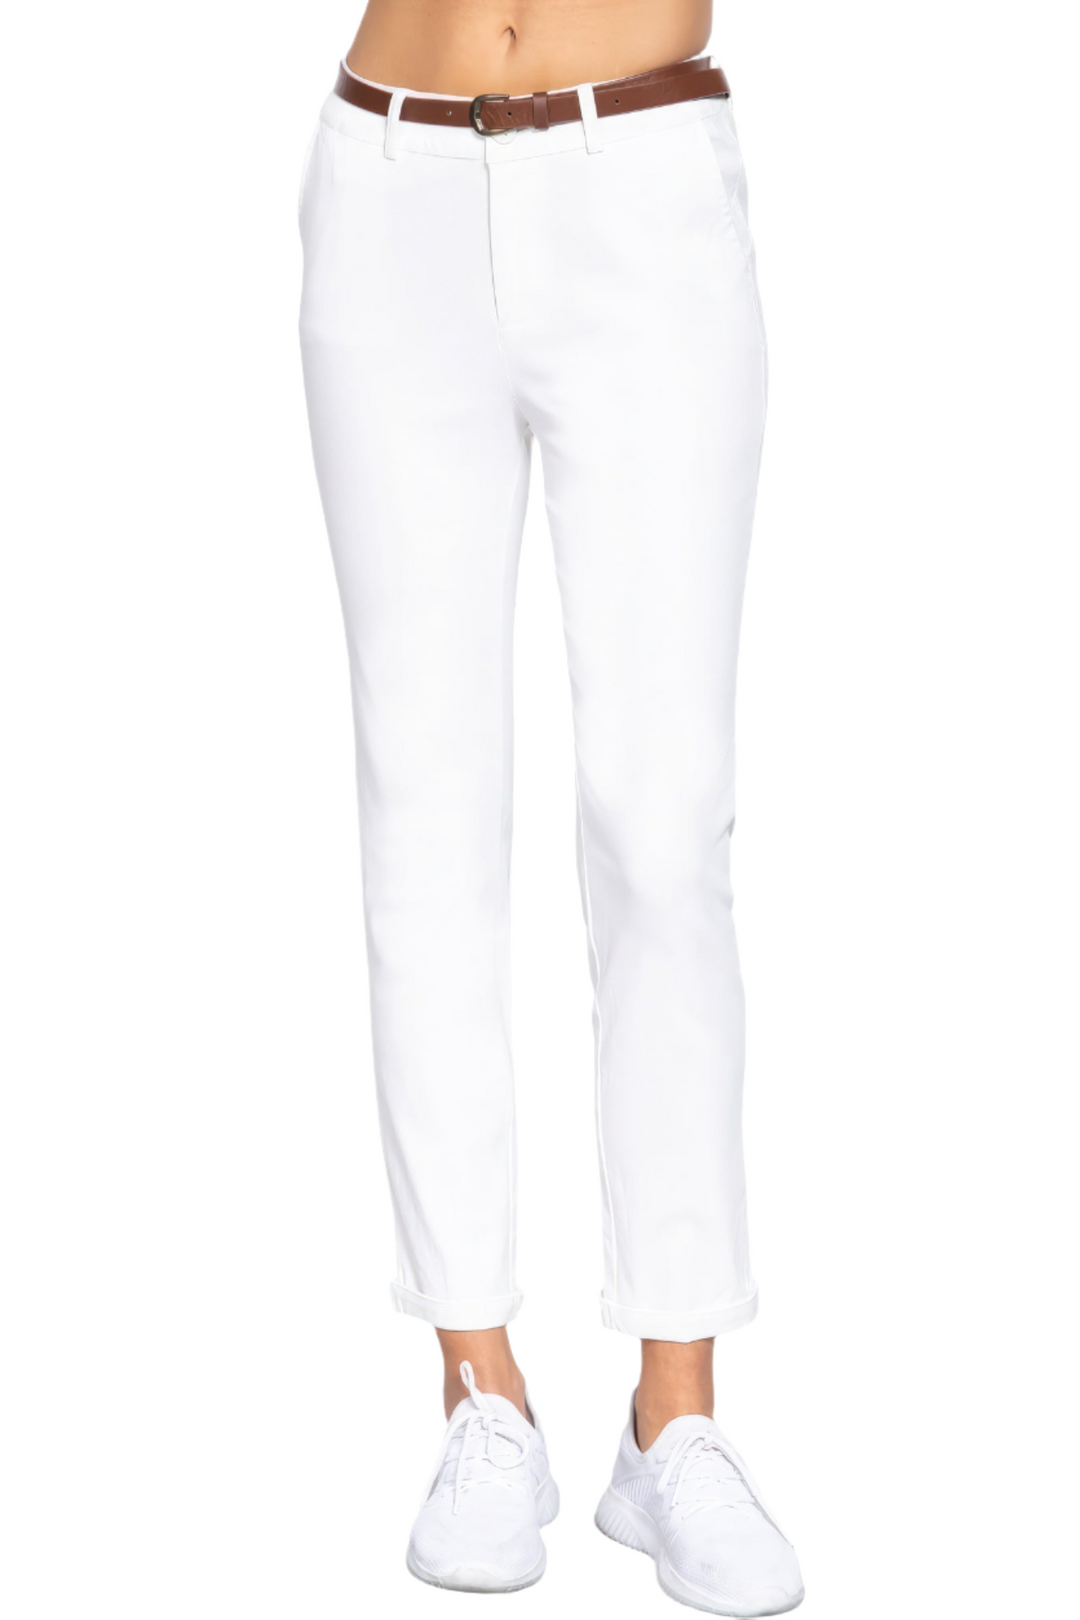 Cotton-span Twill Belted Long Pants with Belt | Comfort Fit, Off White, Sizes S-L